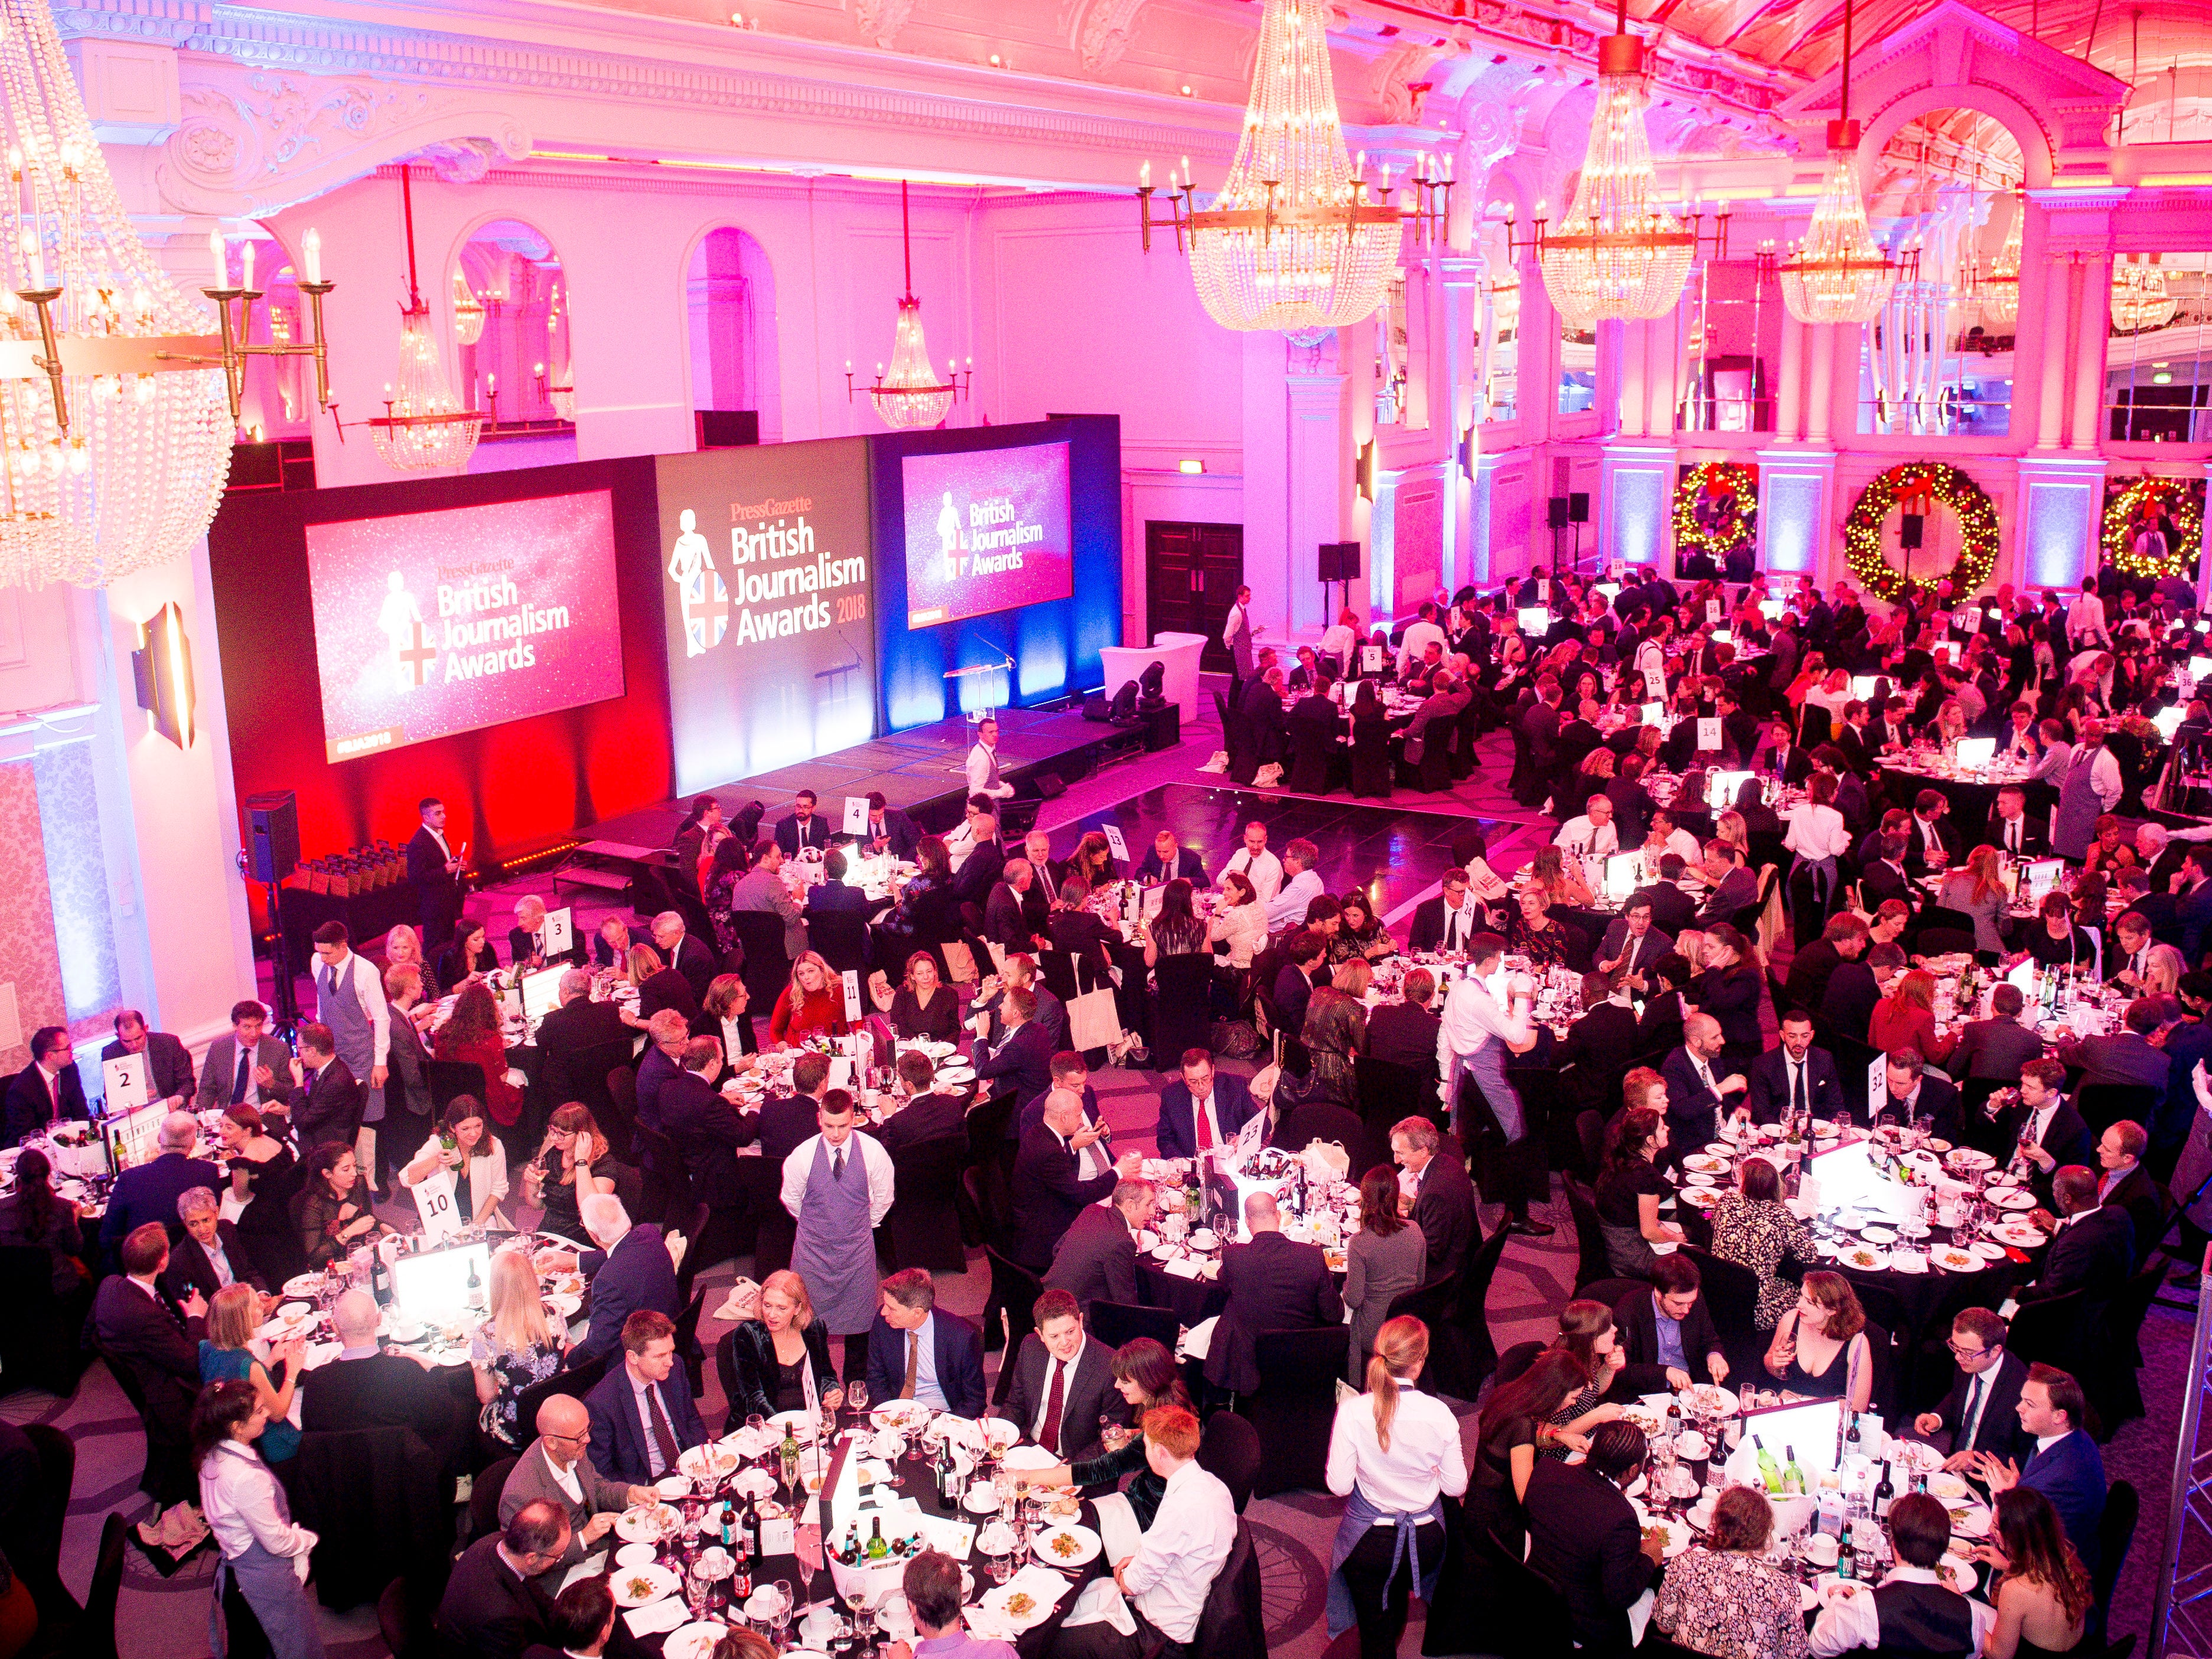 British Journalism Awards 2019: Open for entries from 1 August